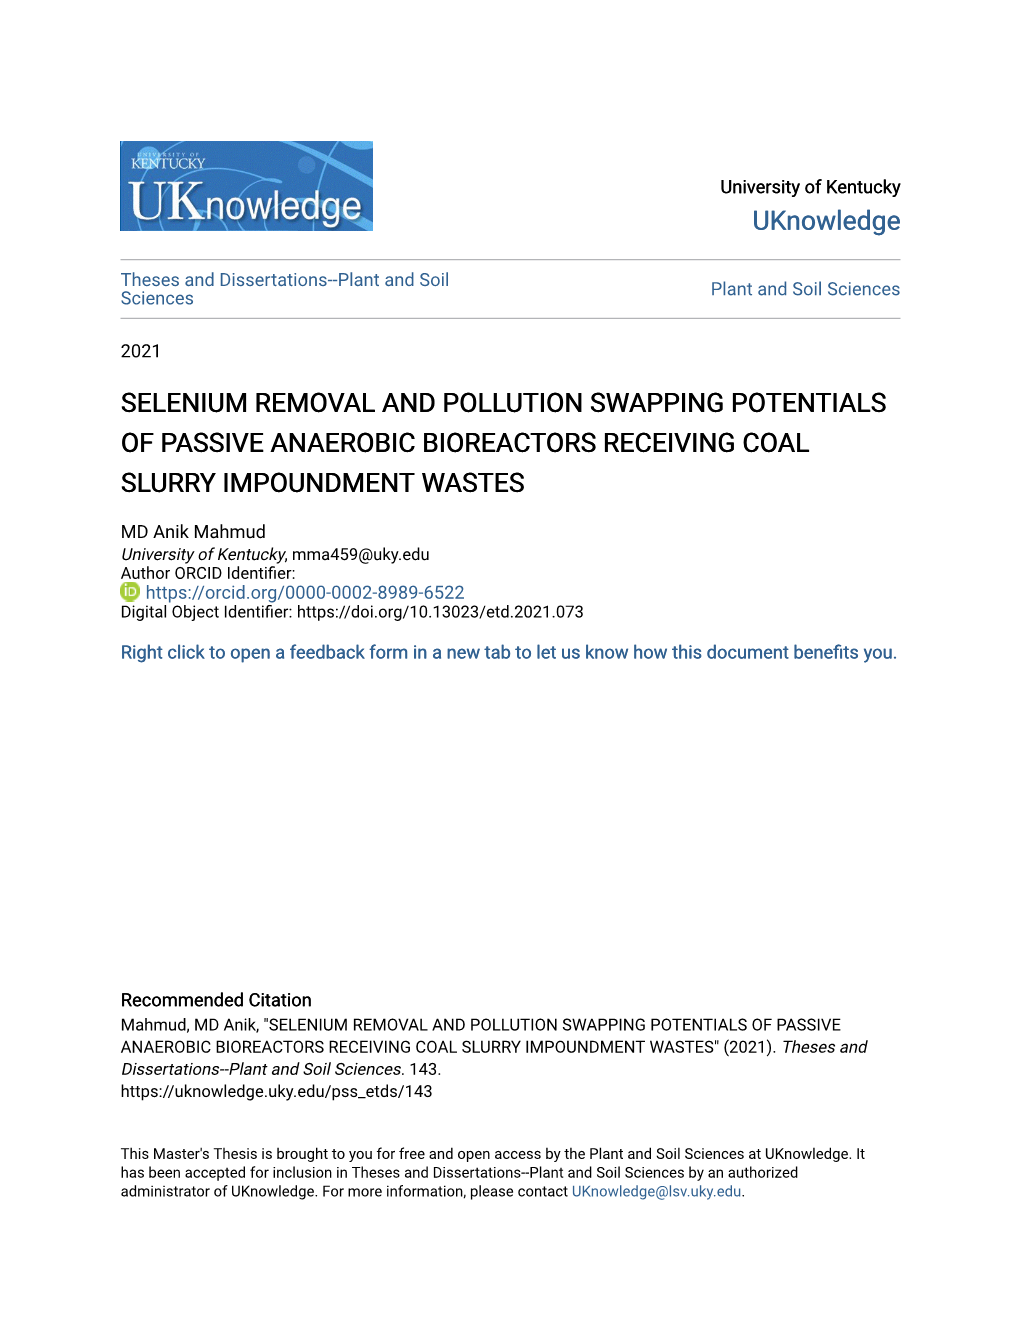 Selenium Removal and Pollution Swapping Potentials of Passive Anaerobic Bioreactors Receiving Coal Slurry Impoundment Wastes